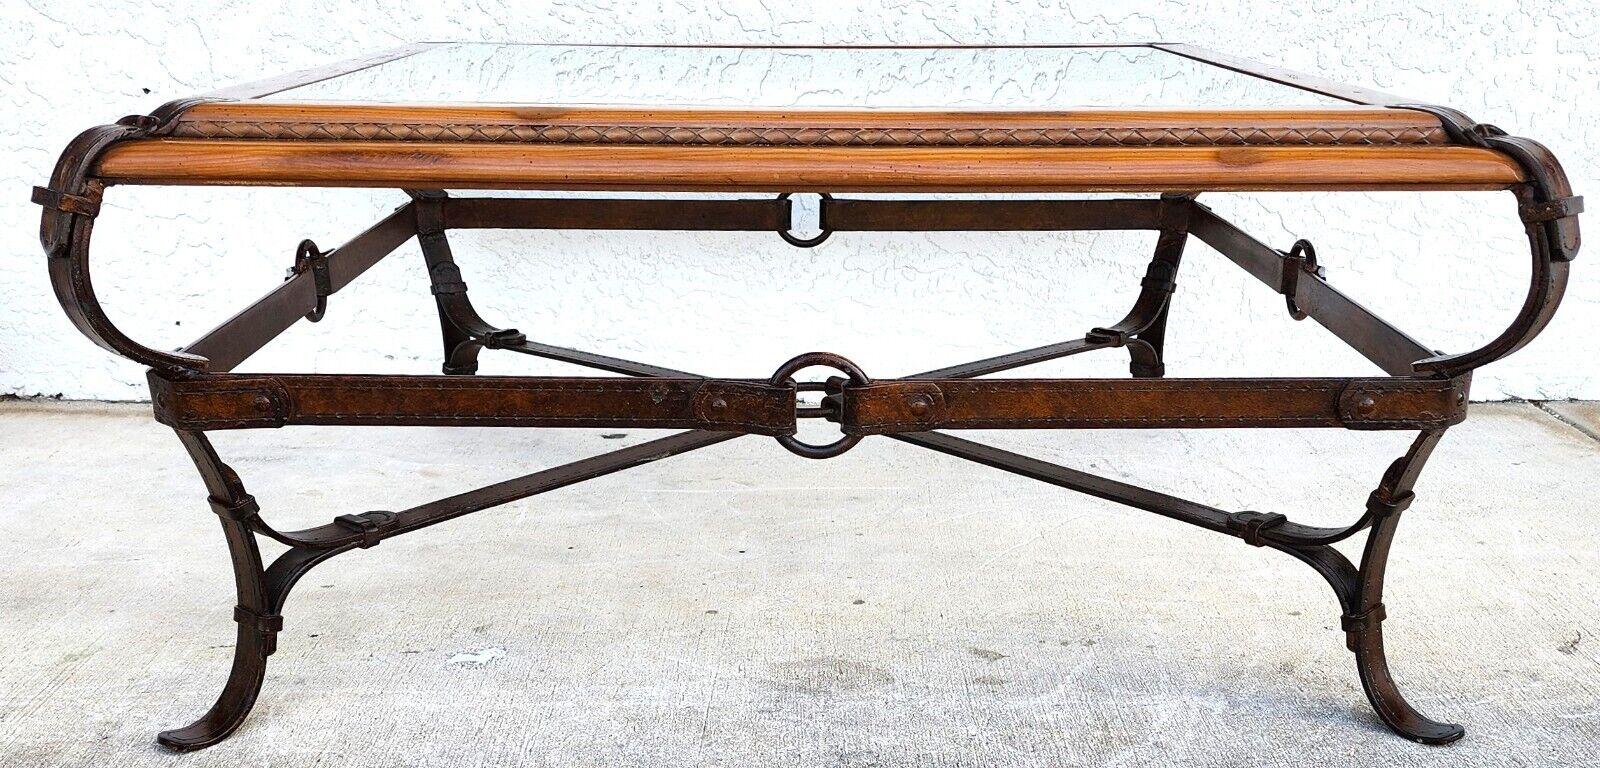 Adnet Hermes Style Coffee Table Equestrian Ranch Rustic In Good Condition For Sale In Lake Worth, FL